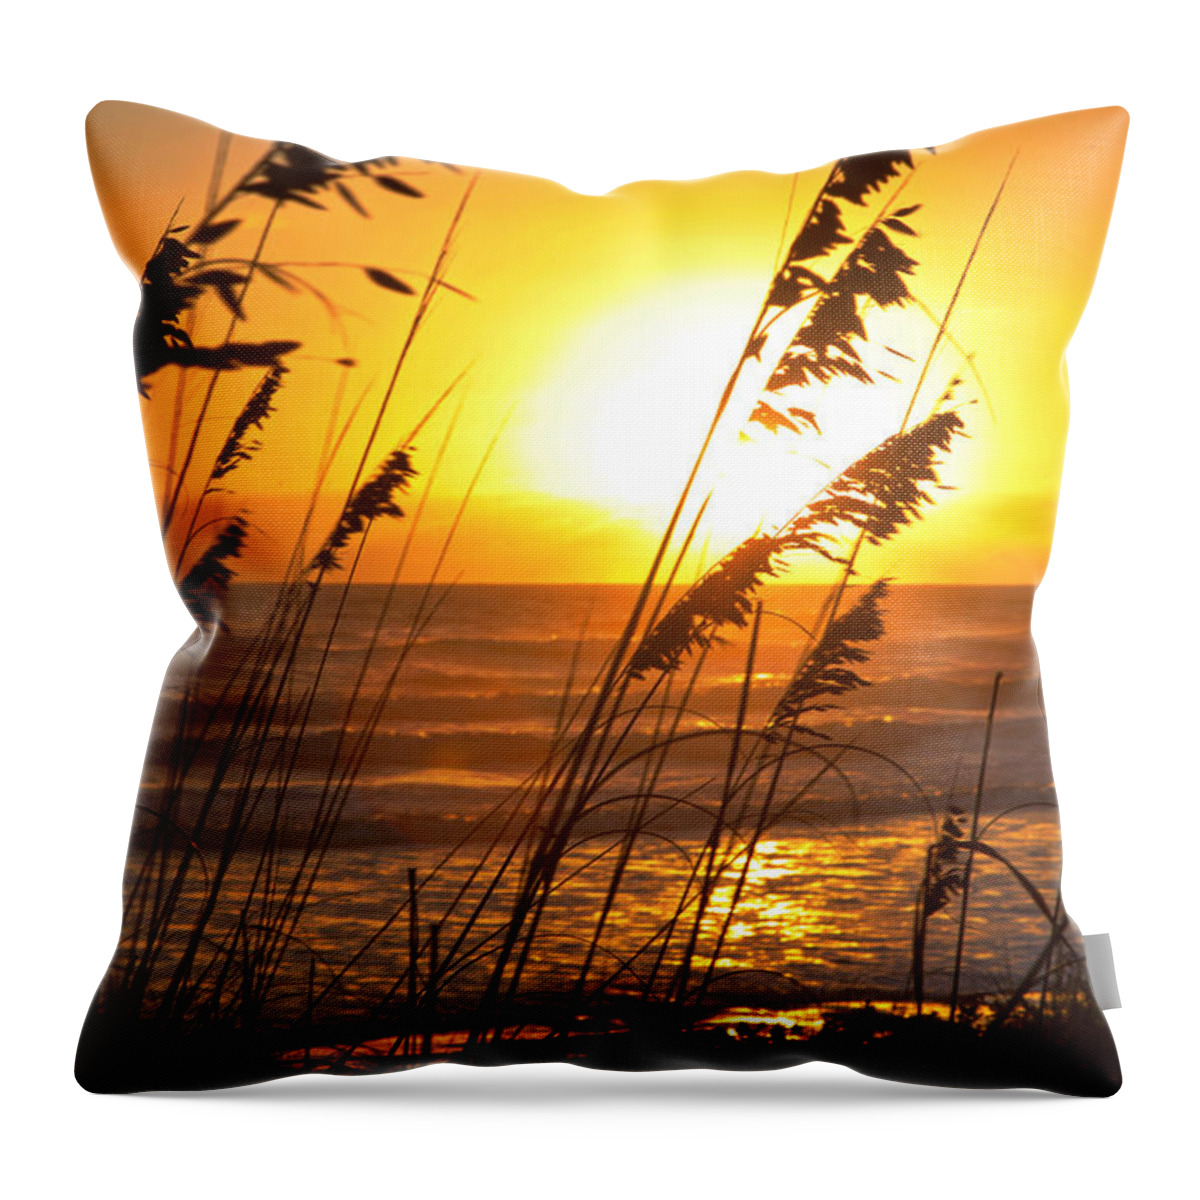 Silhouette Throw Pillow featuring the photograph Sunrise Silhouette by Robert Och